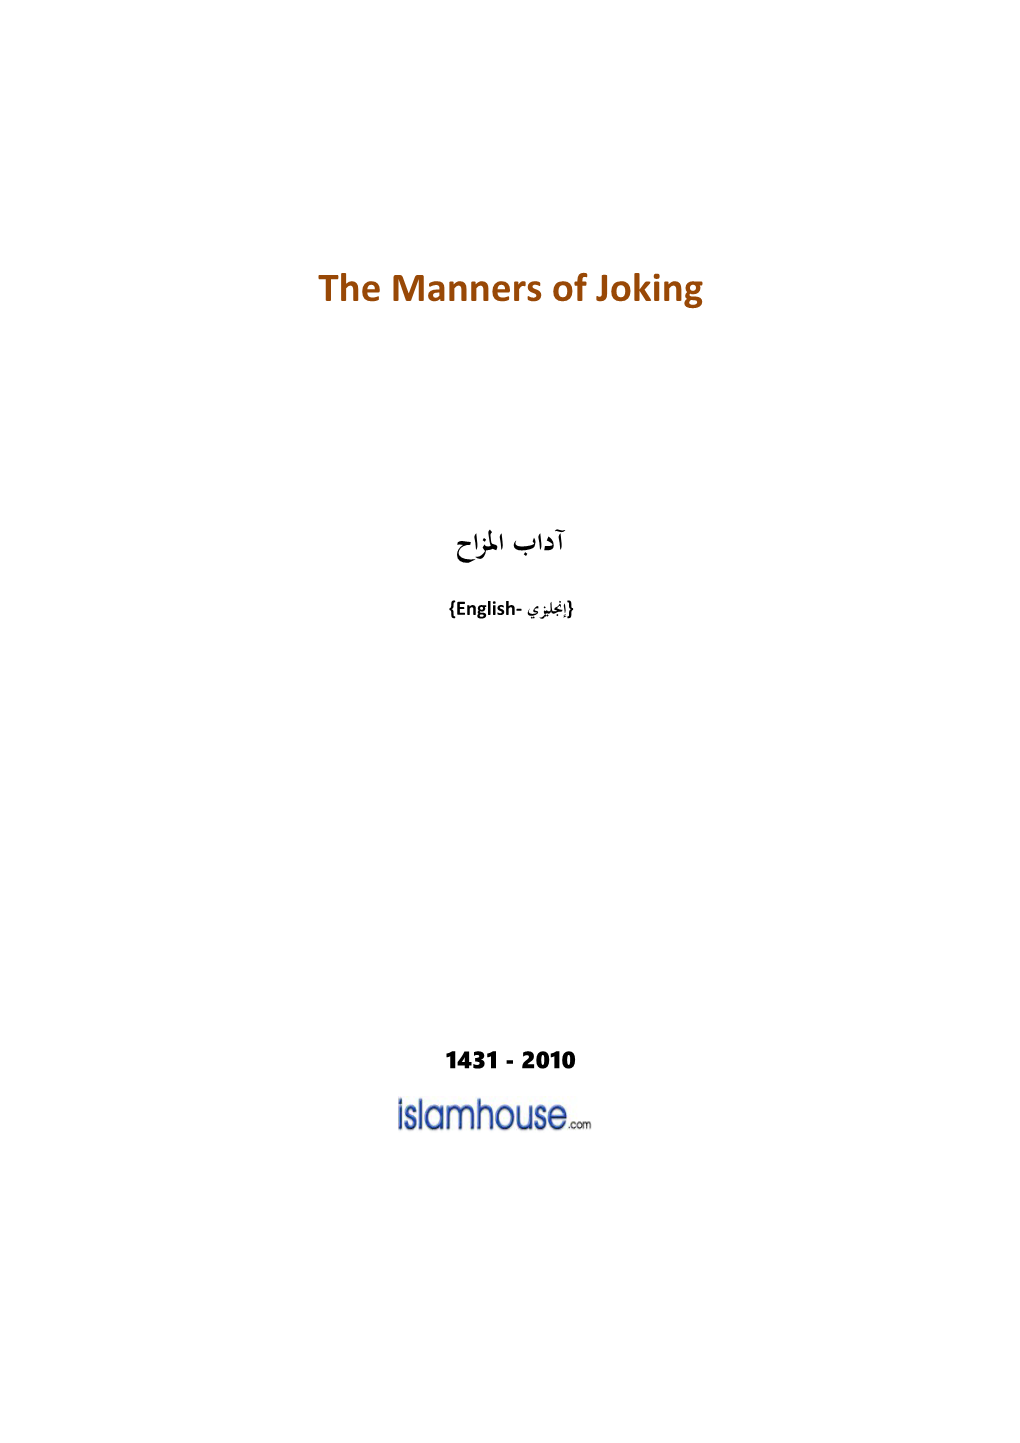 The Manners of Joking